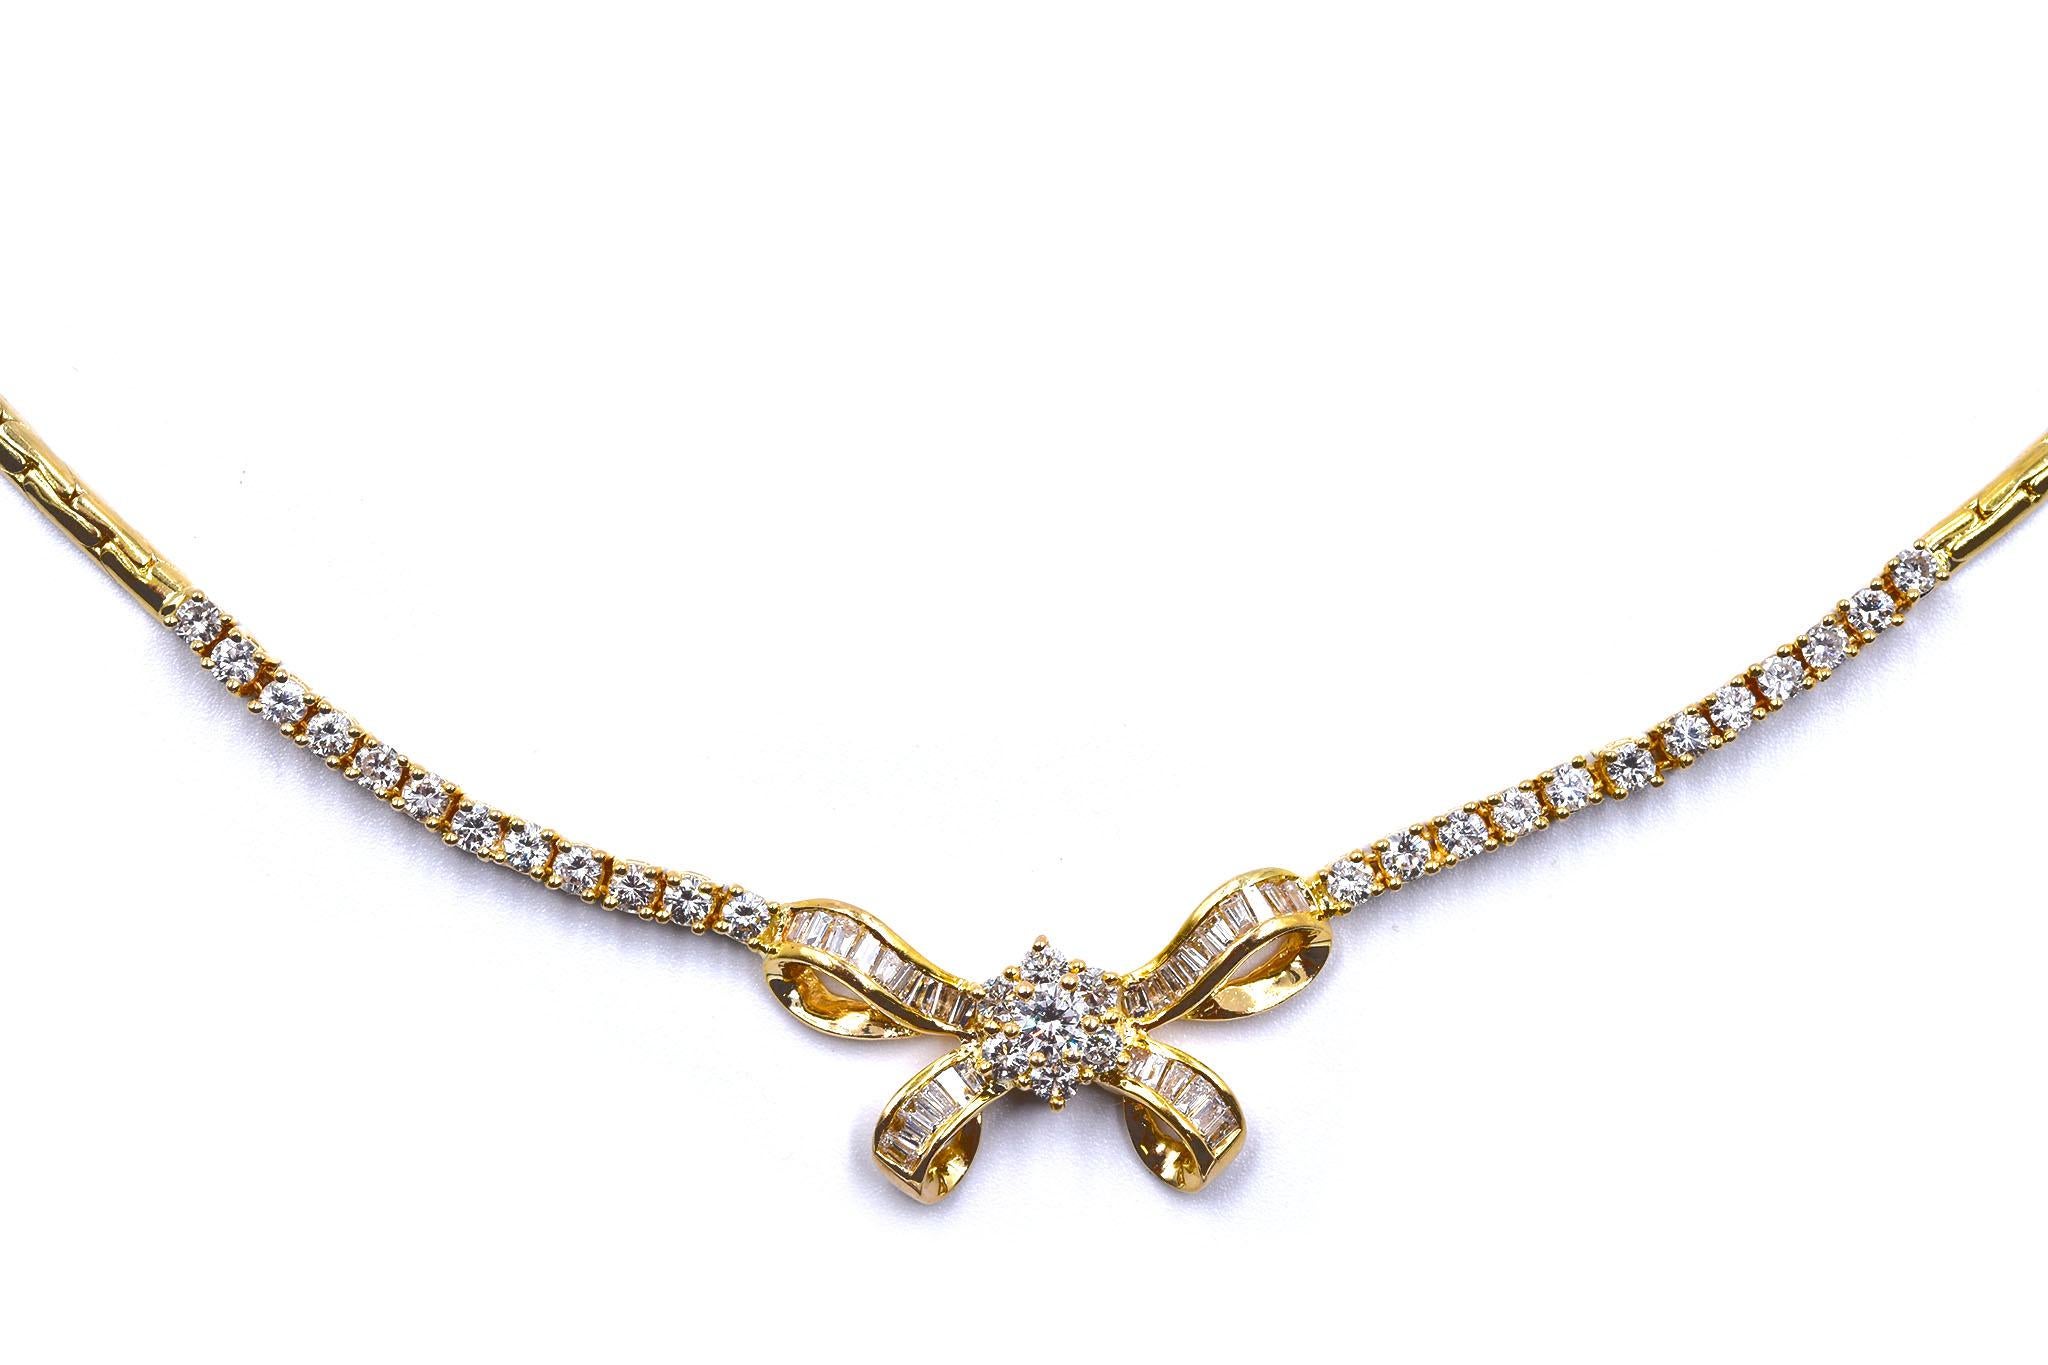 Designer: custom
Material: 14K yellow gold
Diamonds: round & baguette cut = 1.46cttw
Color: G
Clarity: VS1-2
Dimensions: necklace measures 16-inches in length 
Weight: 21.80 grams
